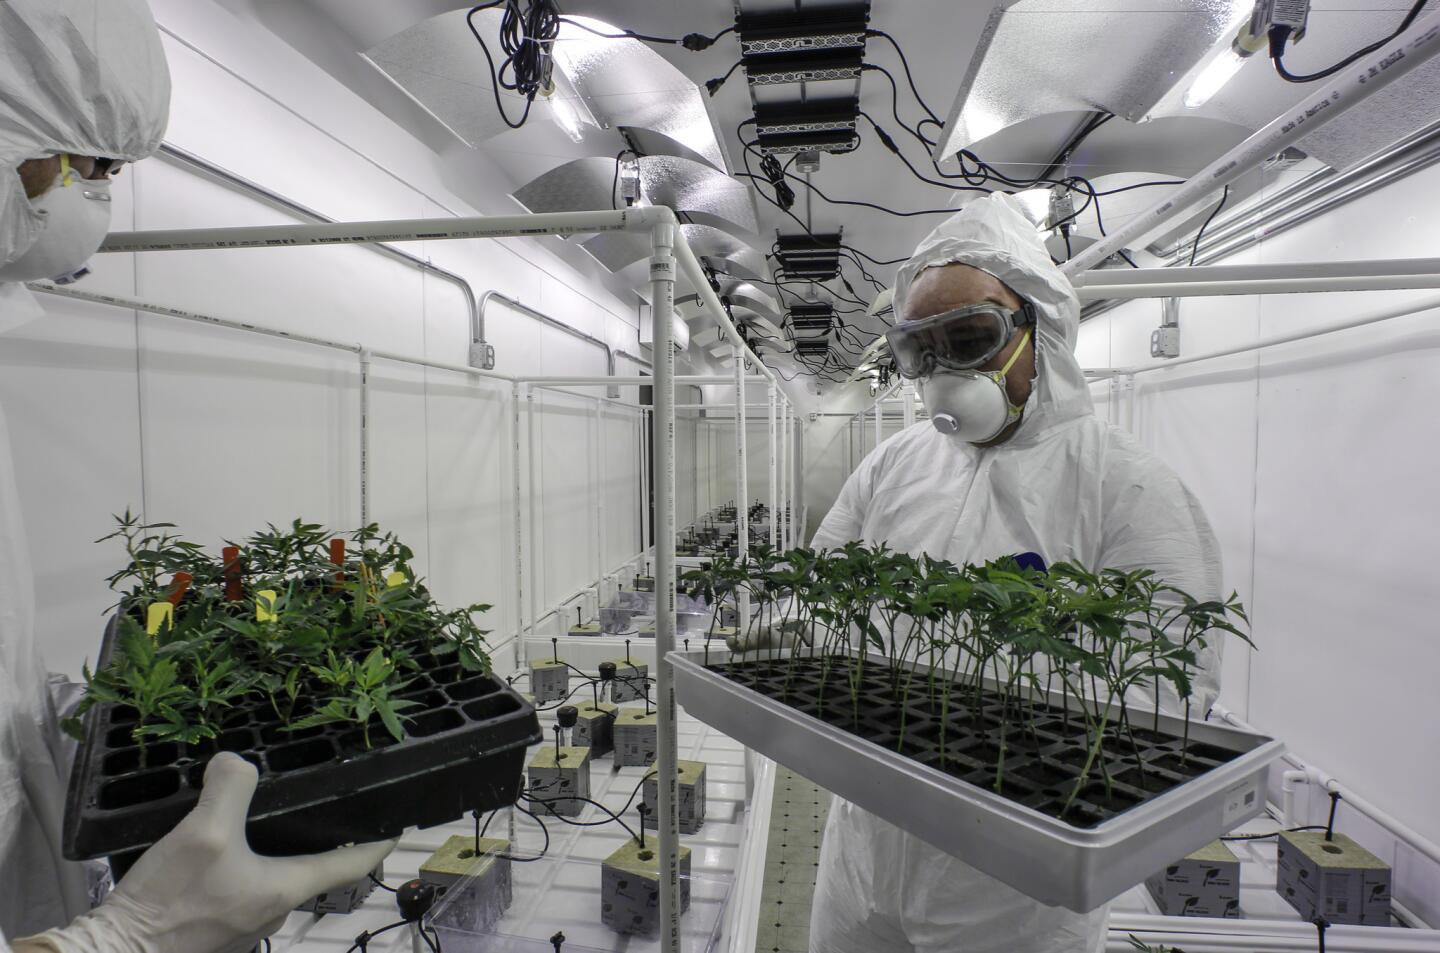 Robert Acosta, right, and an assistant Gutierrez handle marijuana plants for Critical Mind Inc., a pot cultivation business in Adelanto.